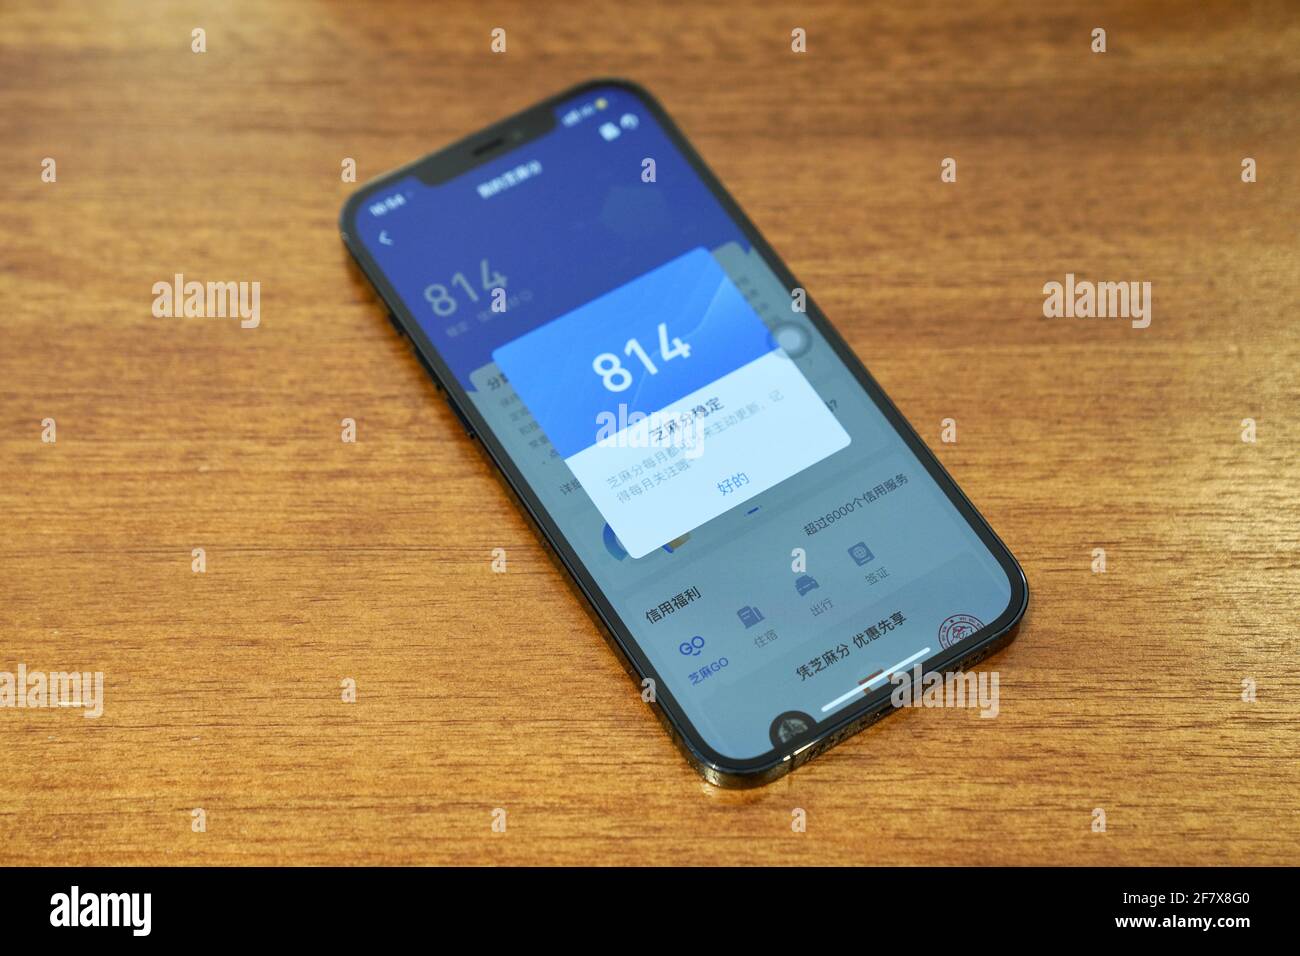 Sesame credit (aka Zhima credit) on an iPhone 12 Pro Max, a  social credit programs created by Ant Financial on Alipay App in China. Stock Photo